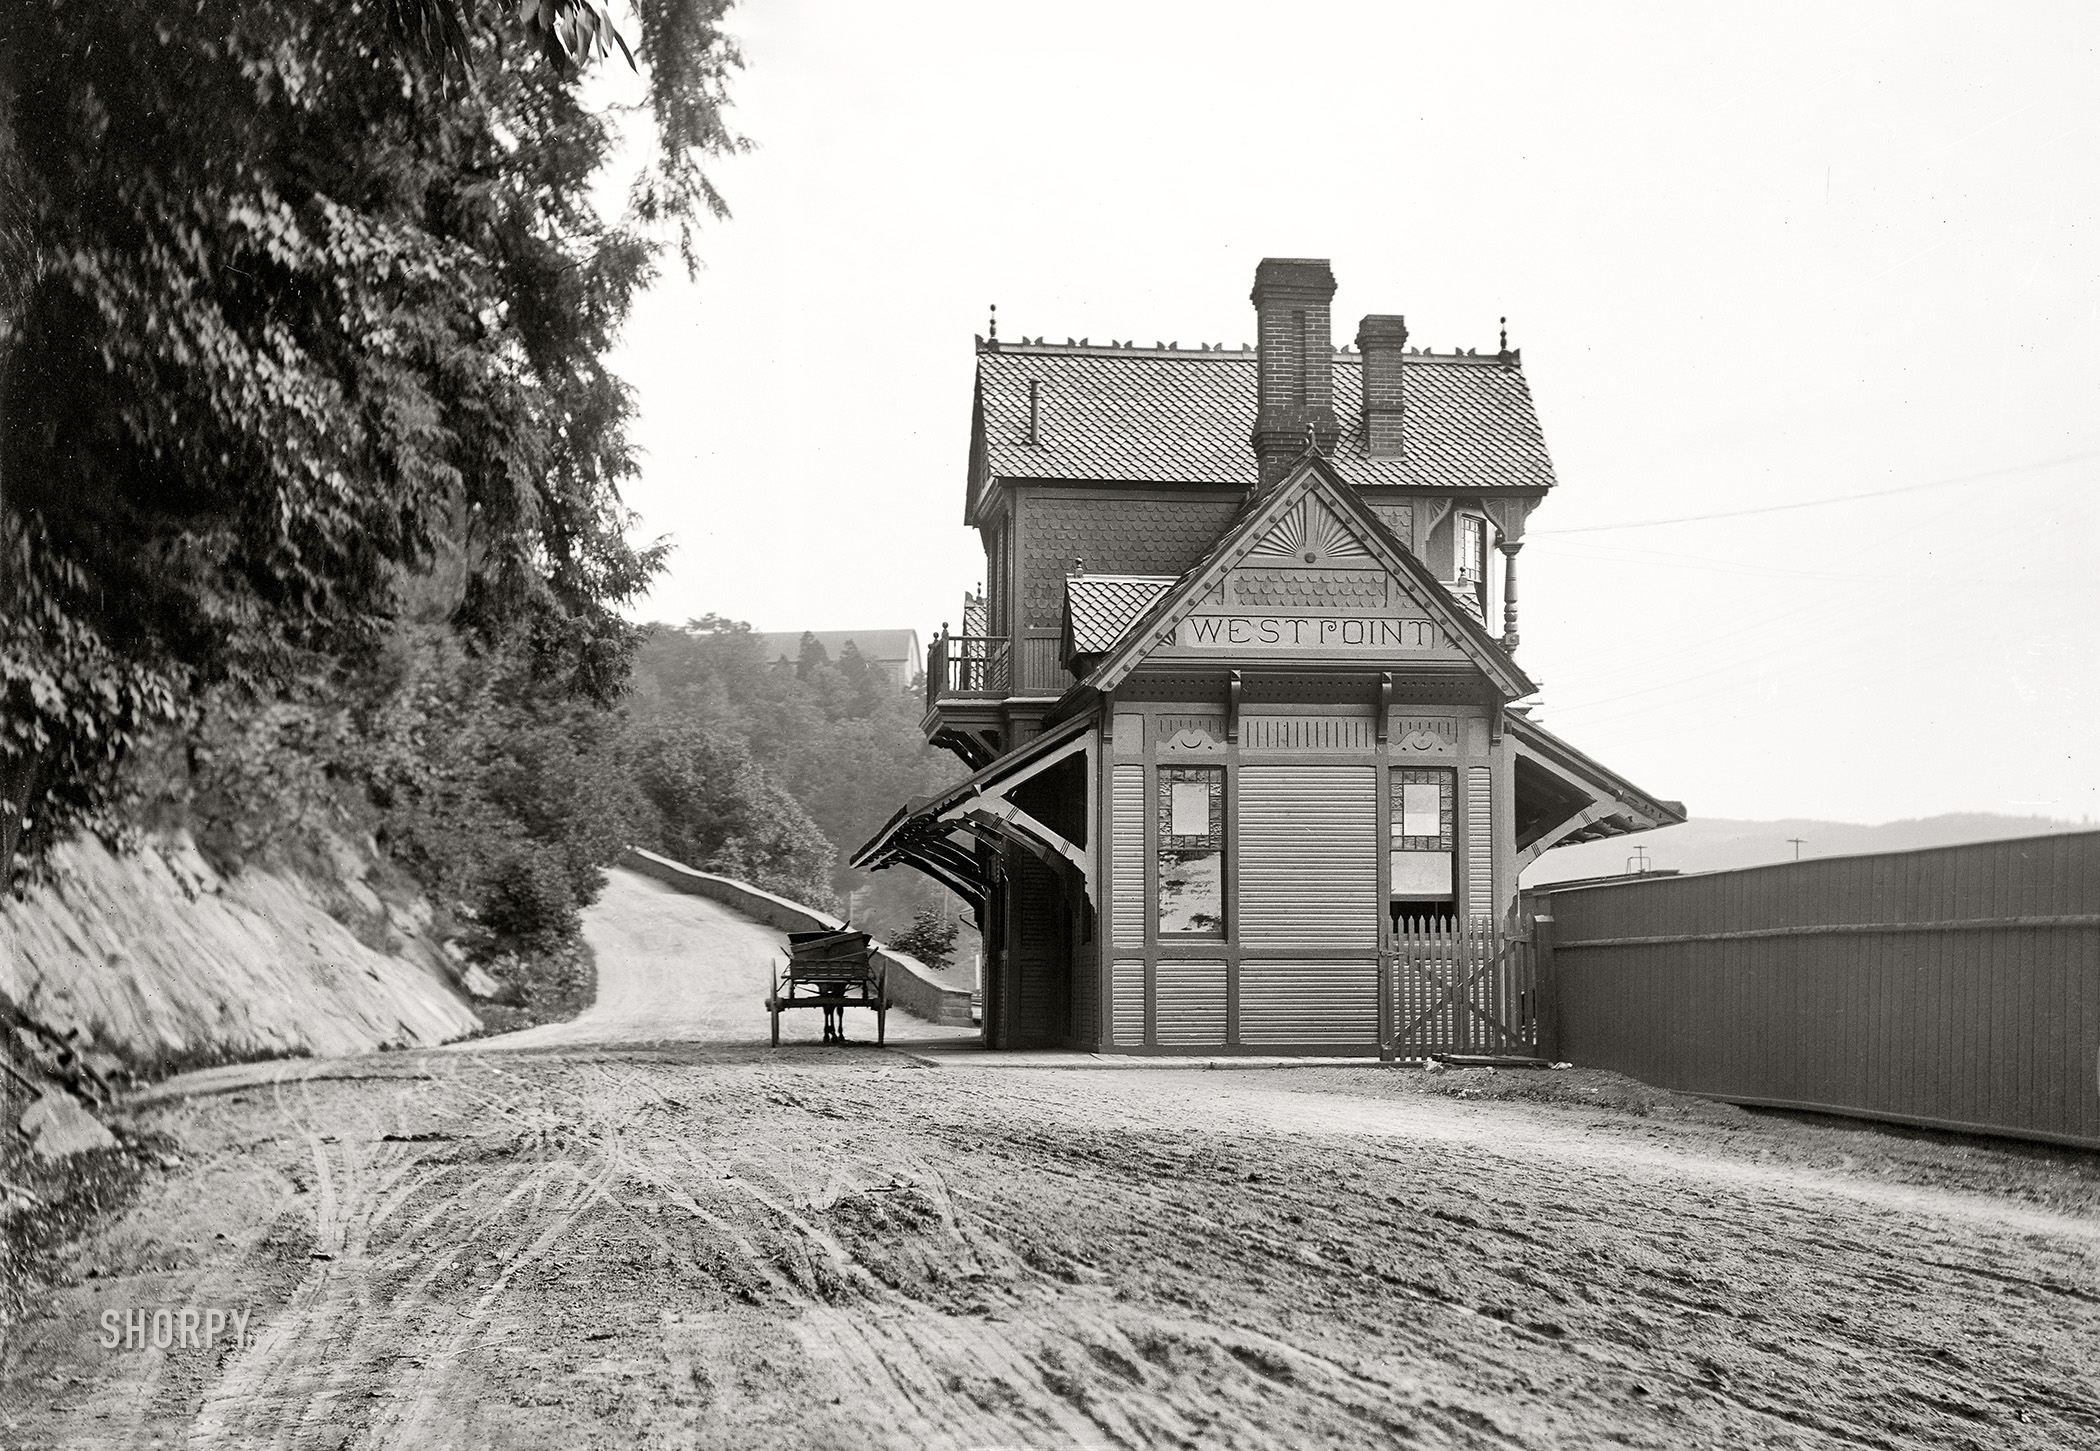 Circa 1895. "West Shore R.R. depot, West Point, N.Y." 8x5 inch dry plate glass negative, Detroit Photographic Company. View full size.